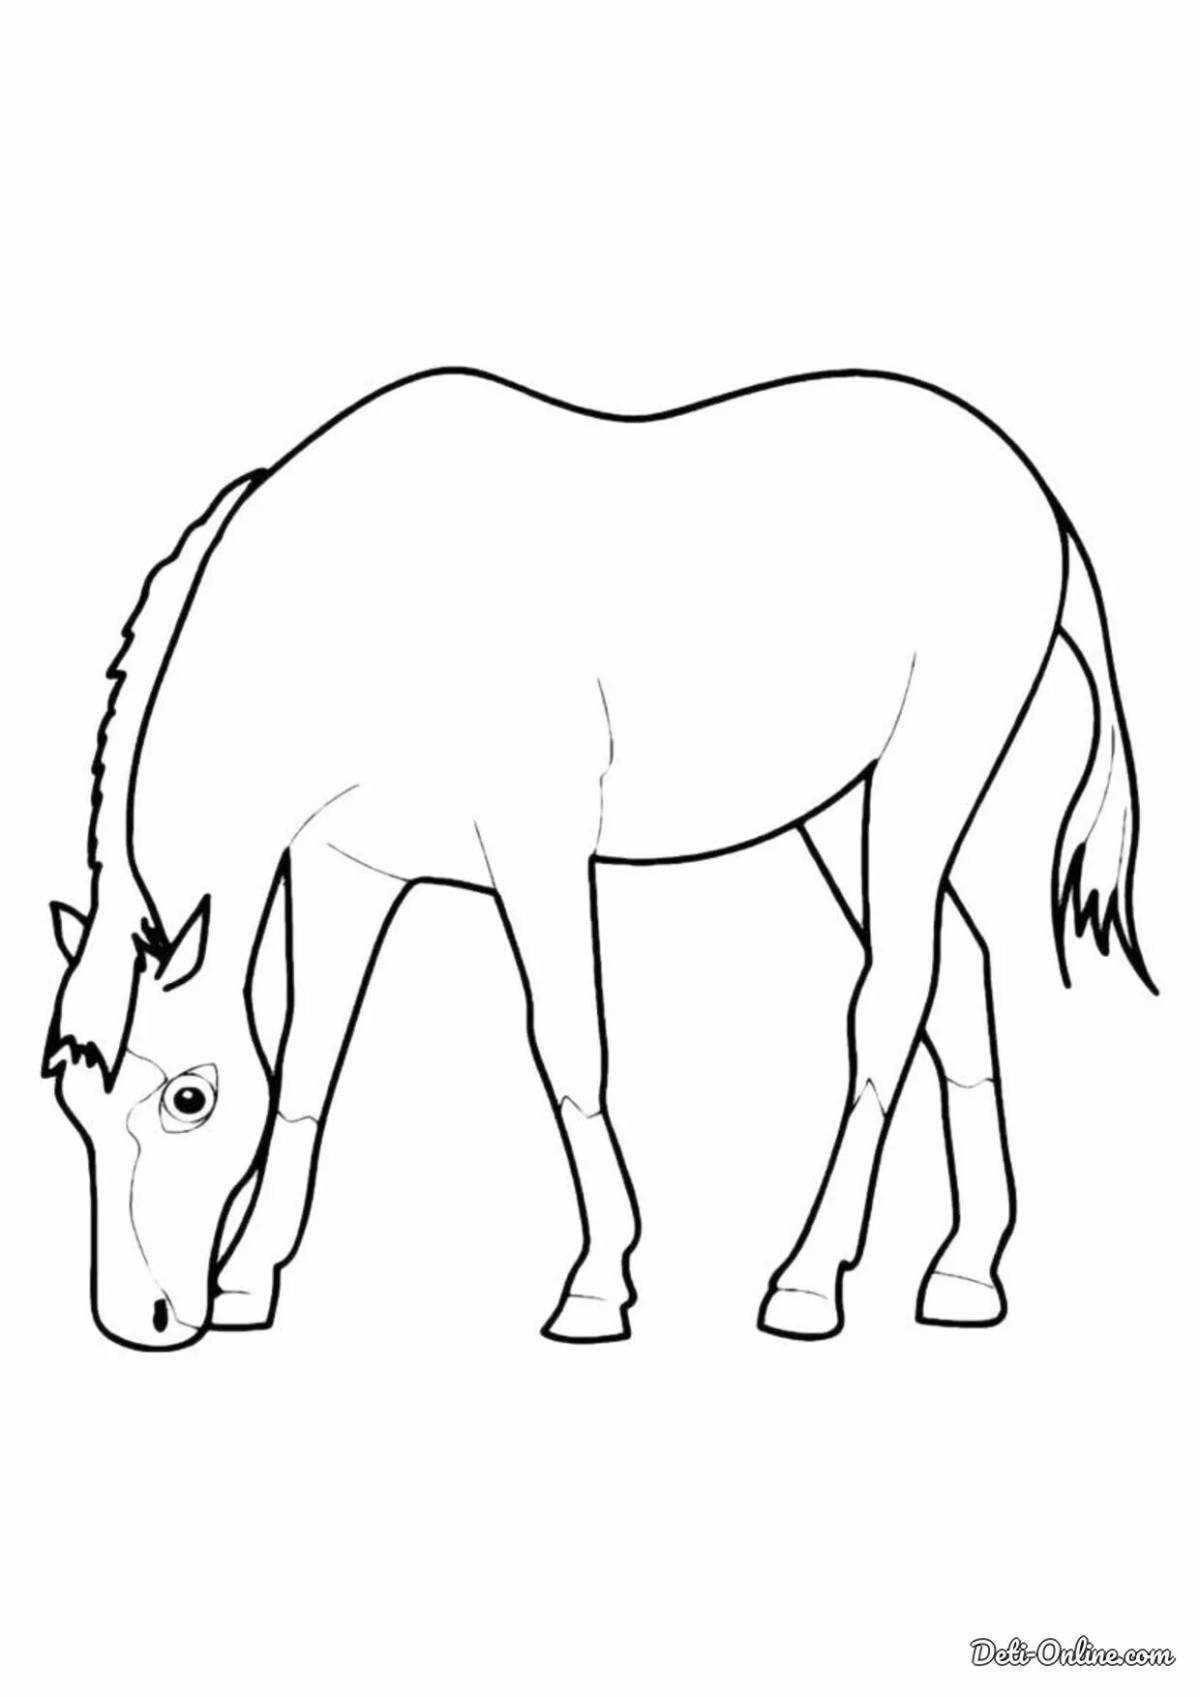 Coloring page peaceful grazing horses